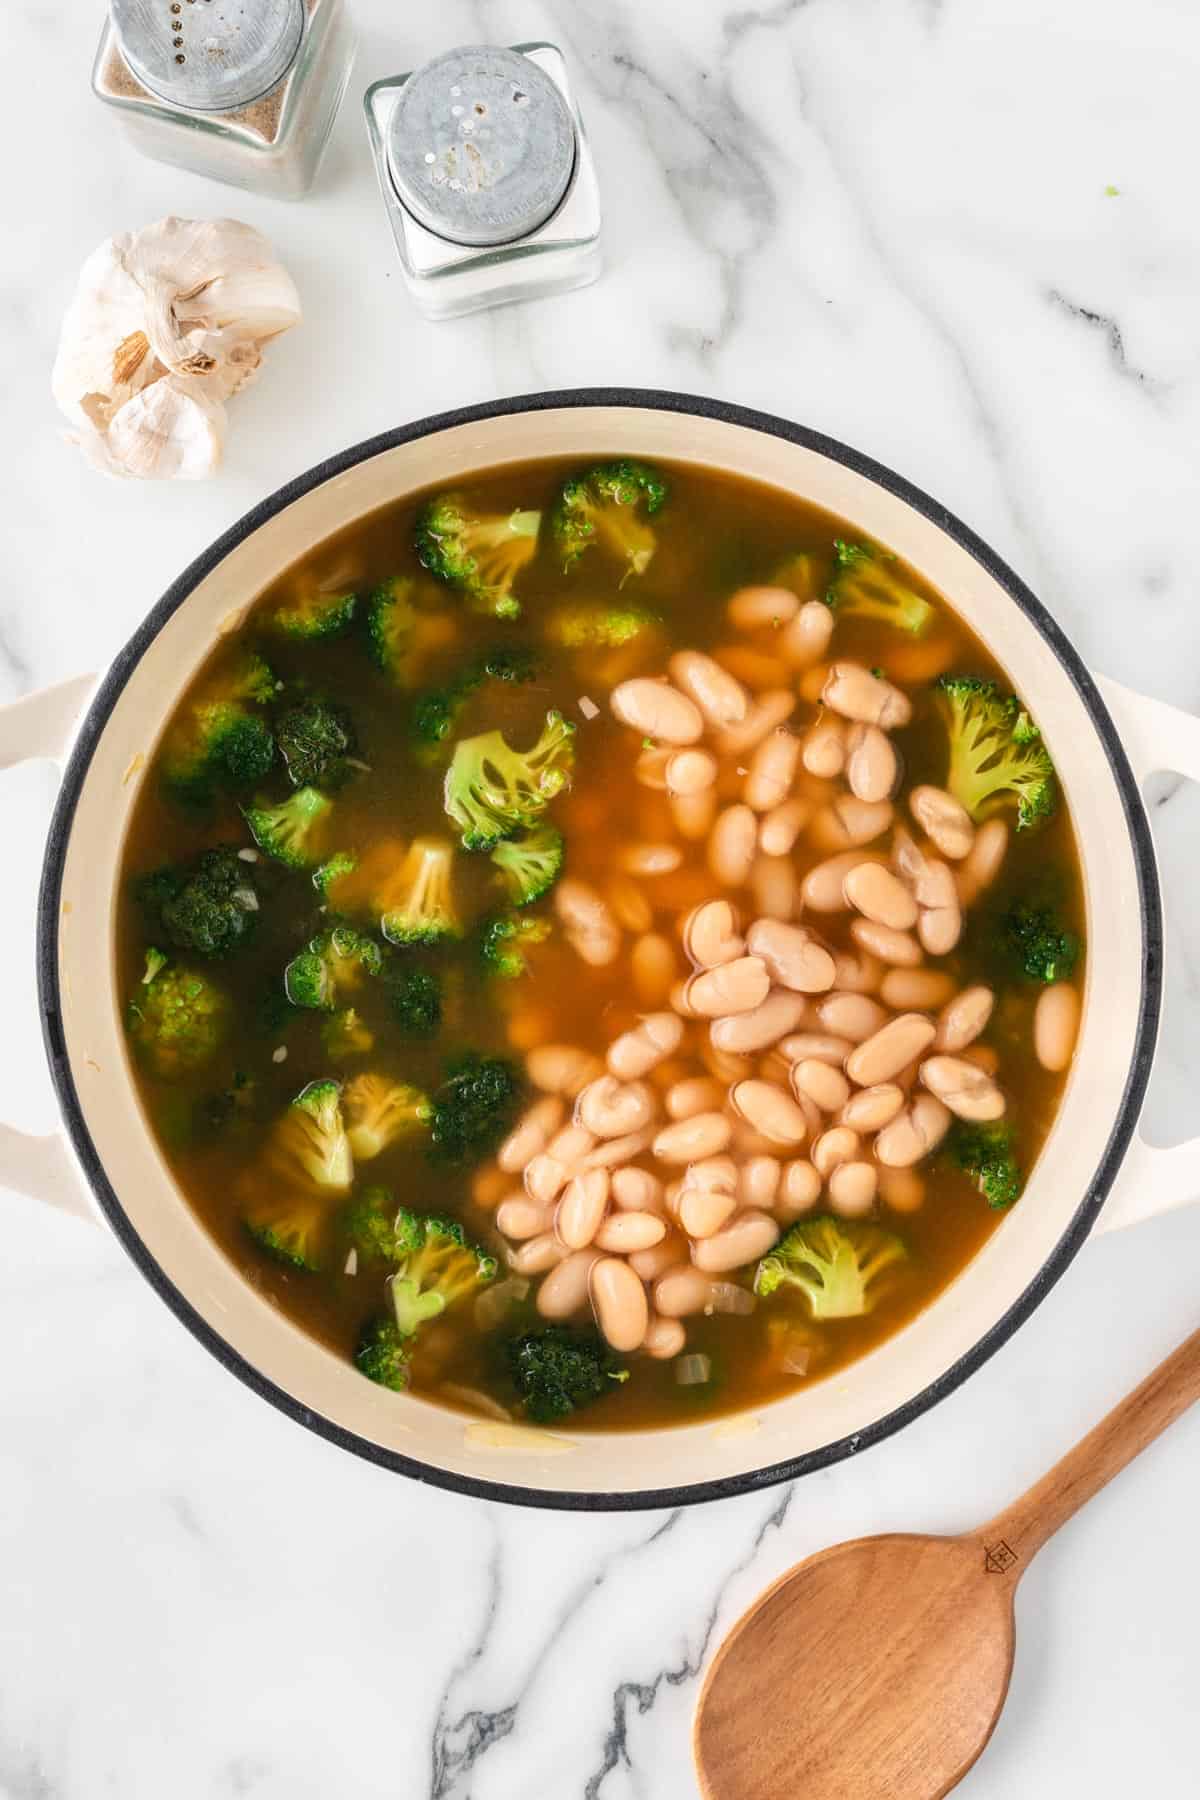 A photo of broccoli and white beans cooking in a pot with broth.